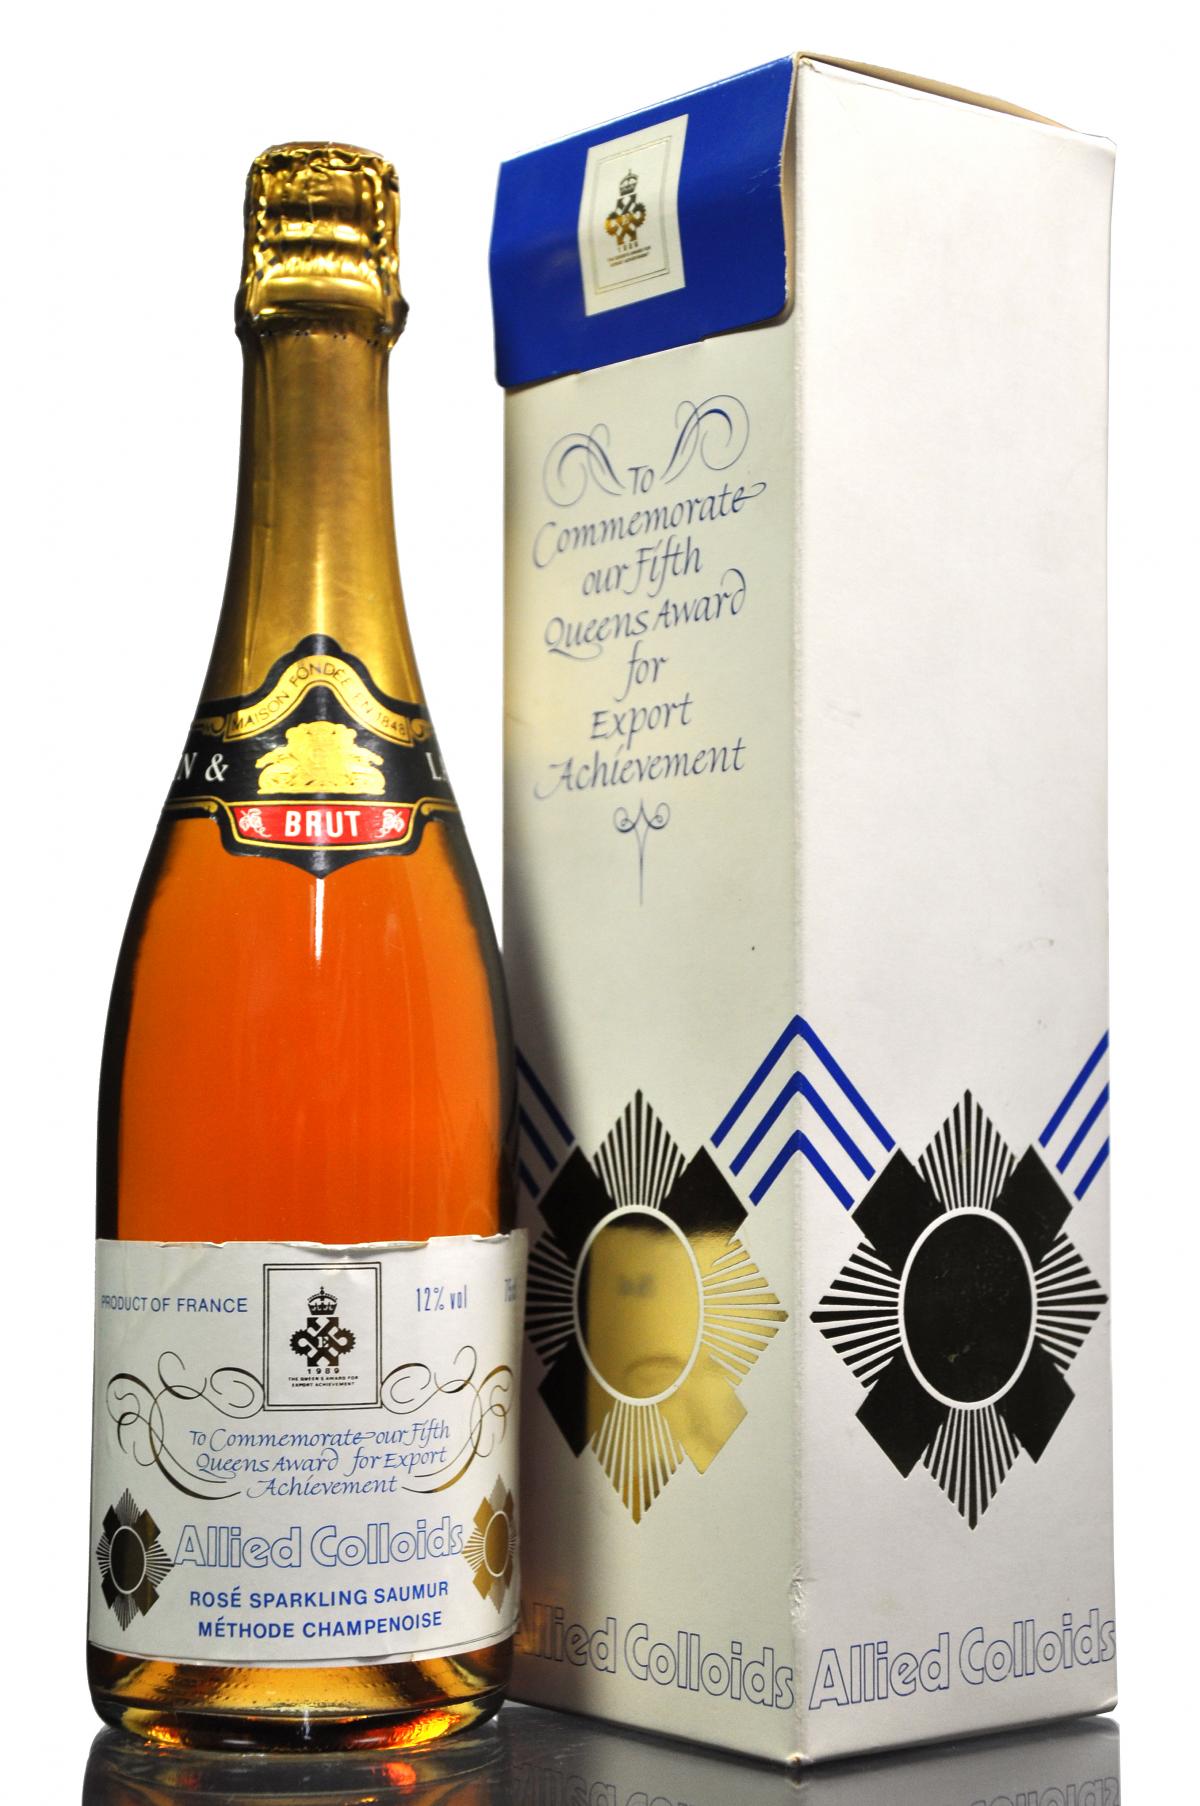 Queens Award Champagne - 1989